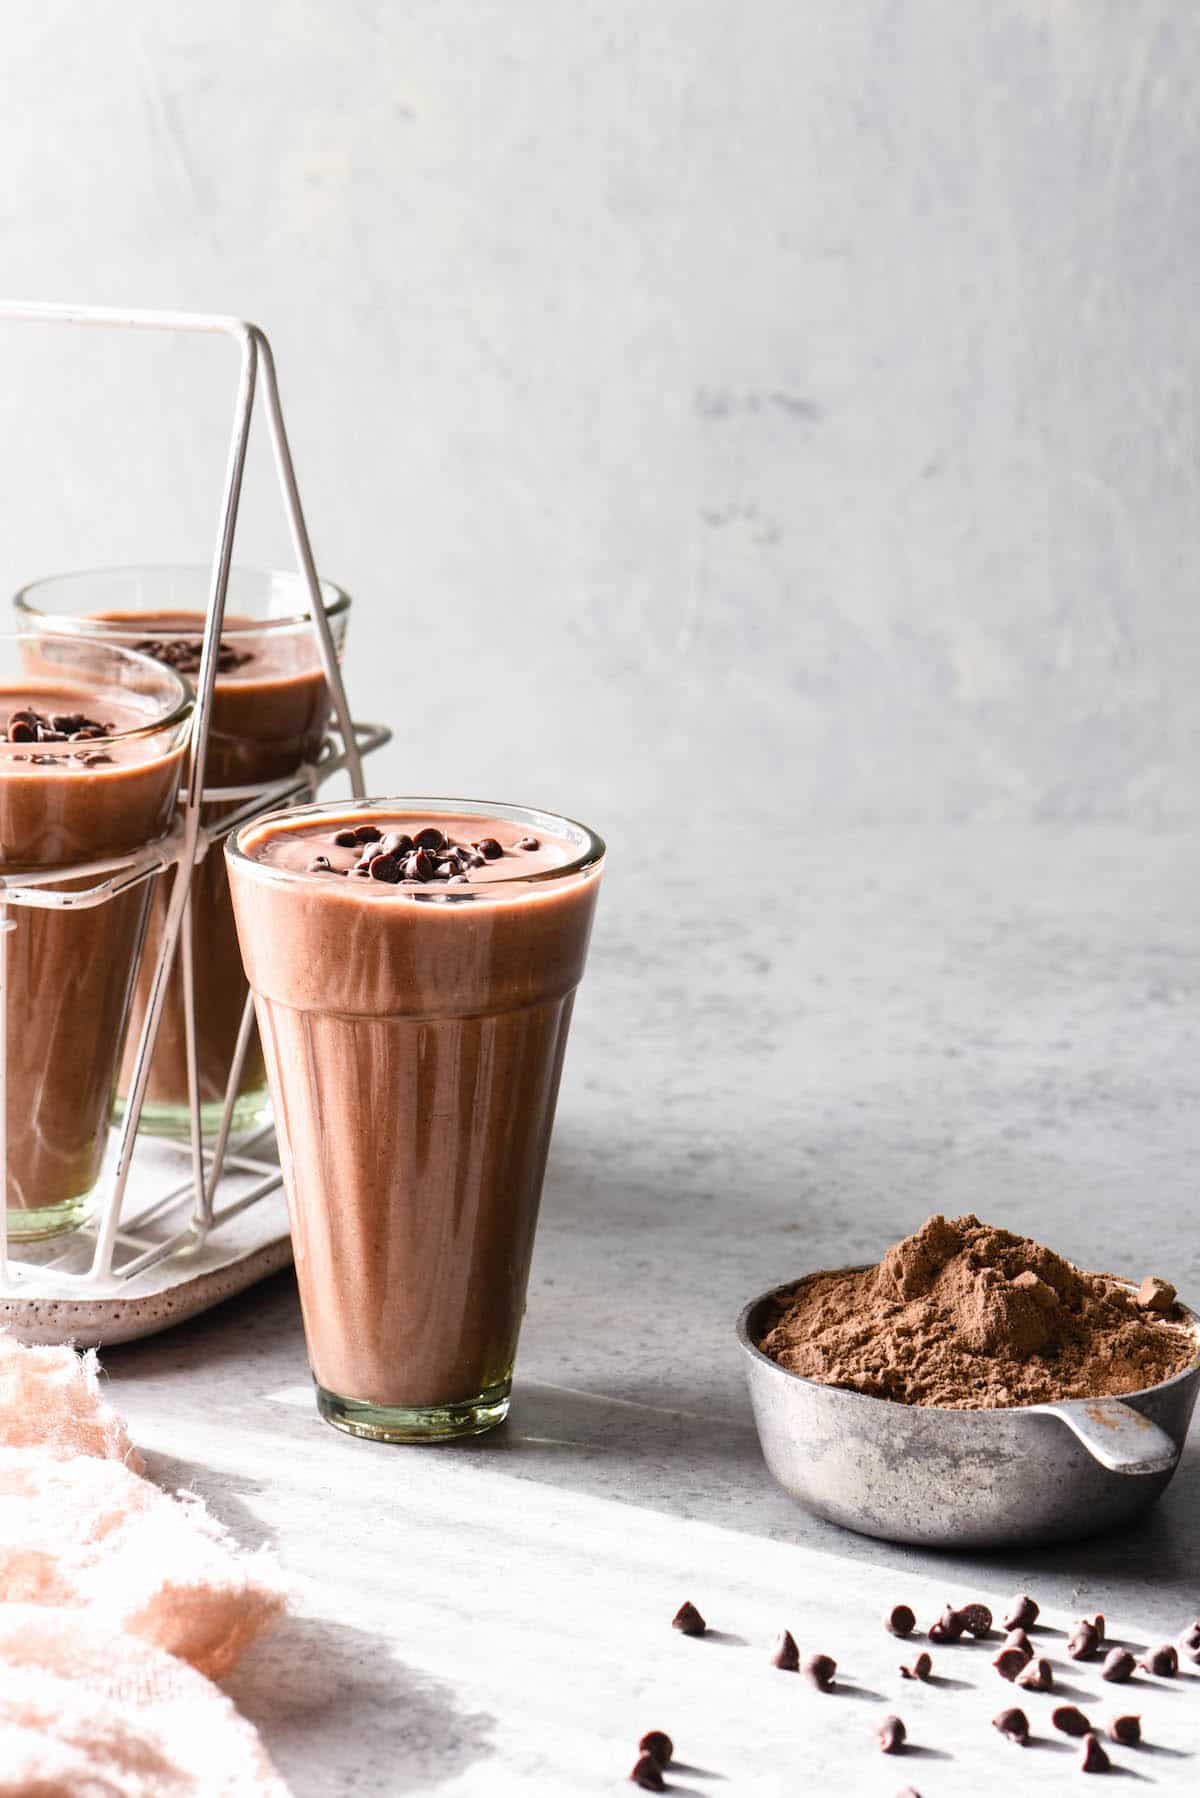 Blend up this High Protein Cocoa Smoothie for an energizing breakfast, or recovery after a workout. Fruity and full of chocolate flavor, it feels decadent while still being good for you!  | foxeslovelemons.com